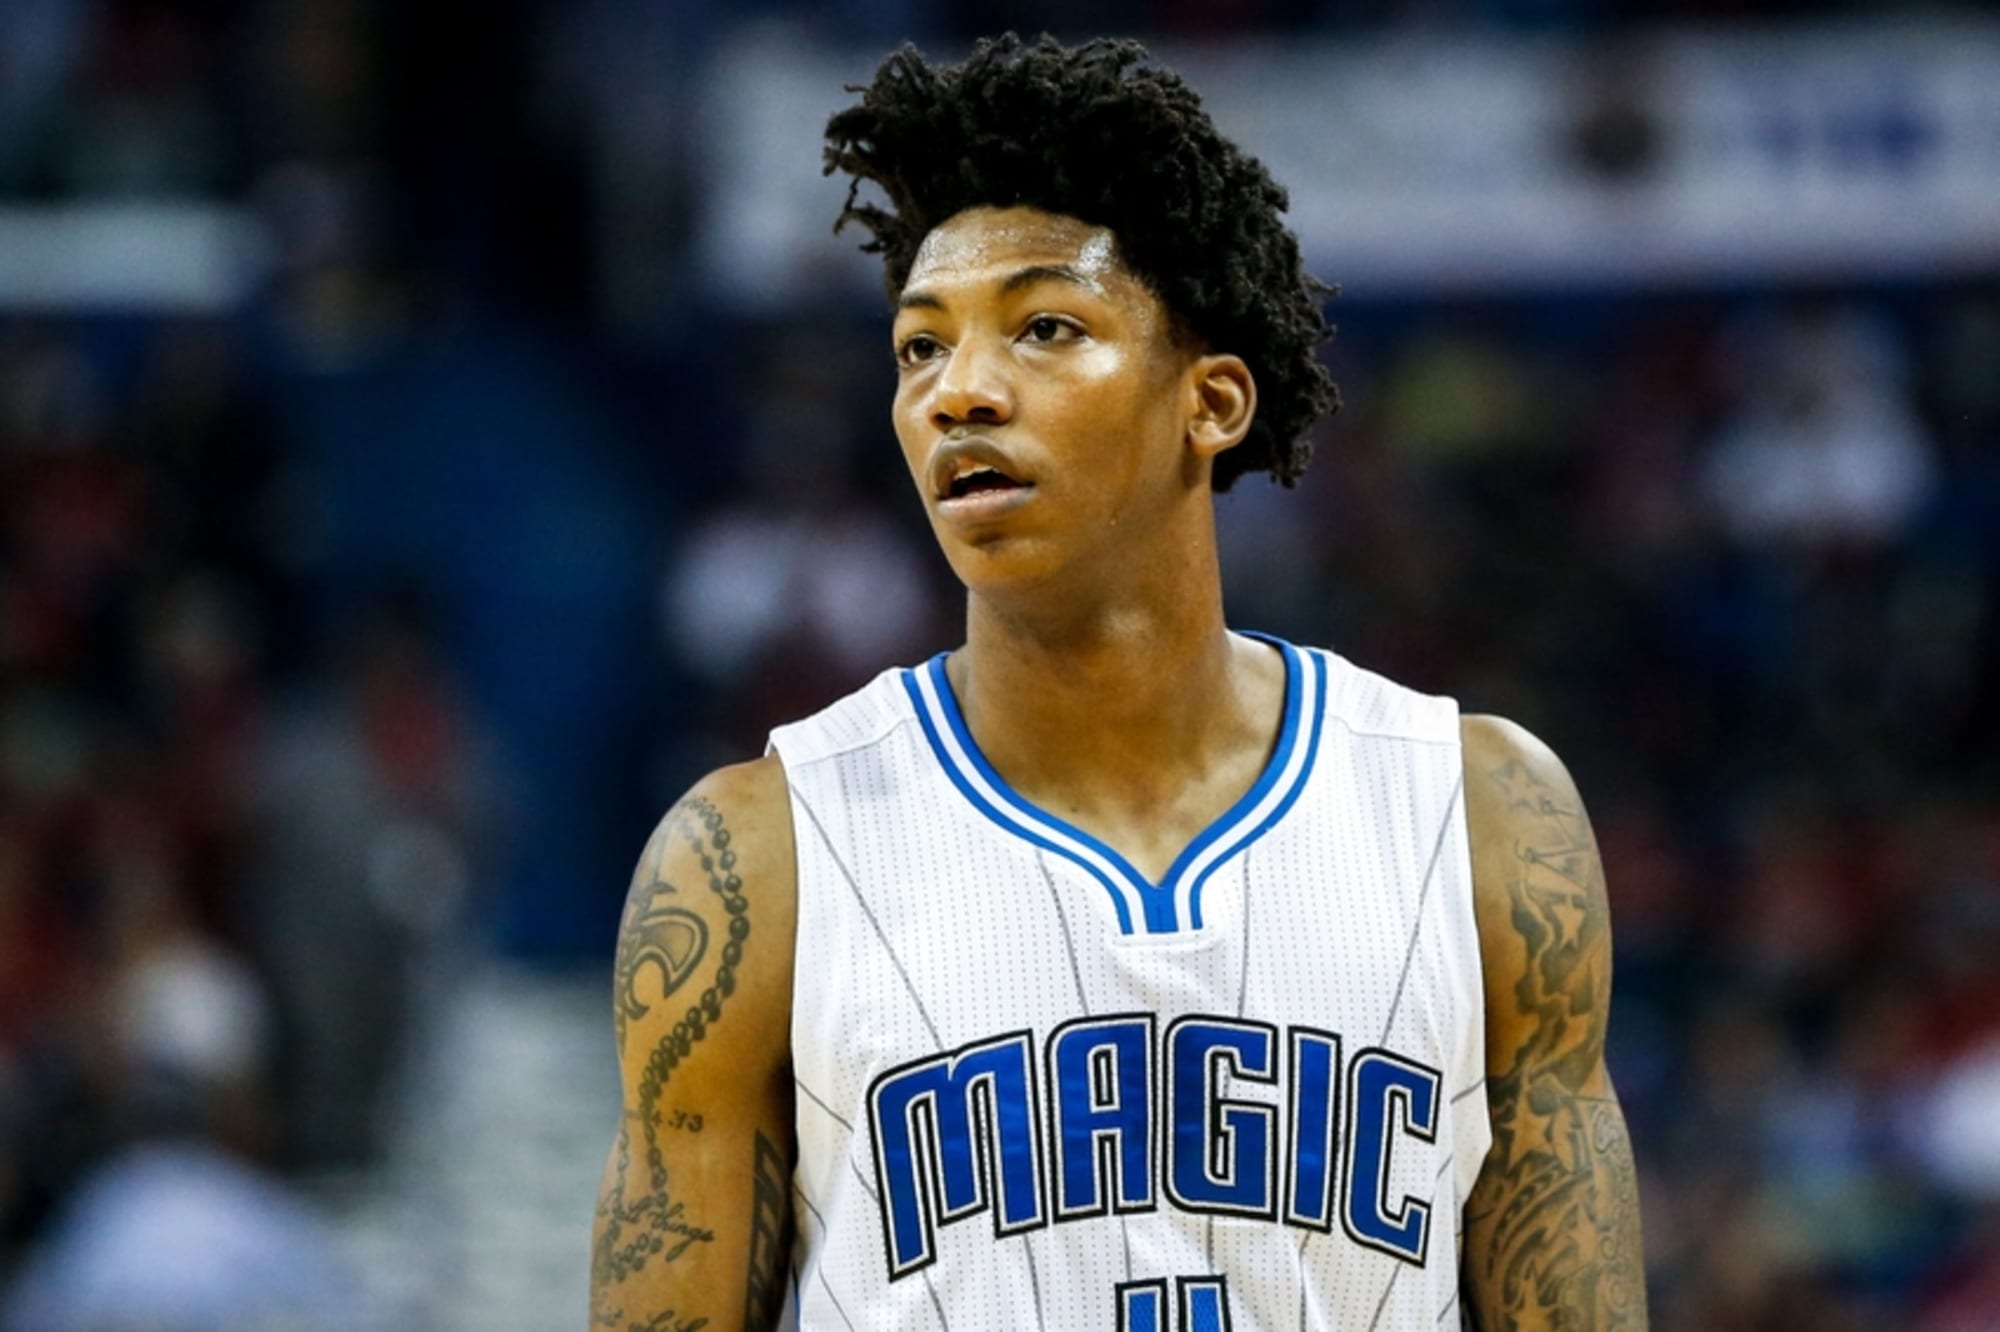 Elfrid Payton, Marcus Smart and point guard shooting development